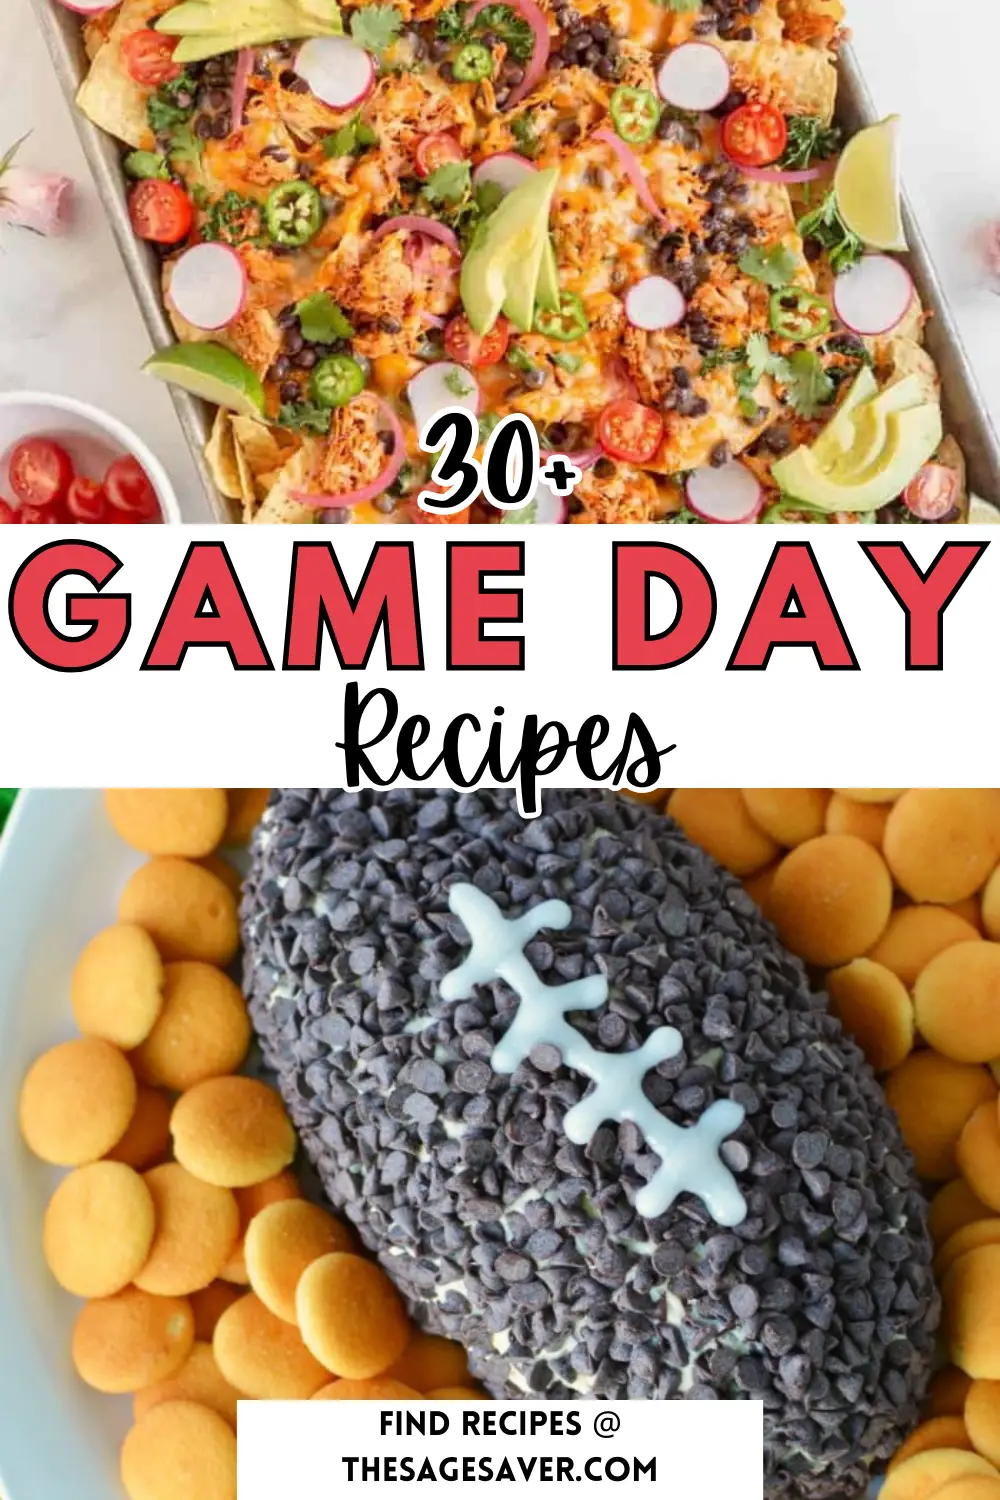 Irresistible Super Bowl Party Food Your Guests Will Love